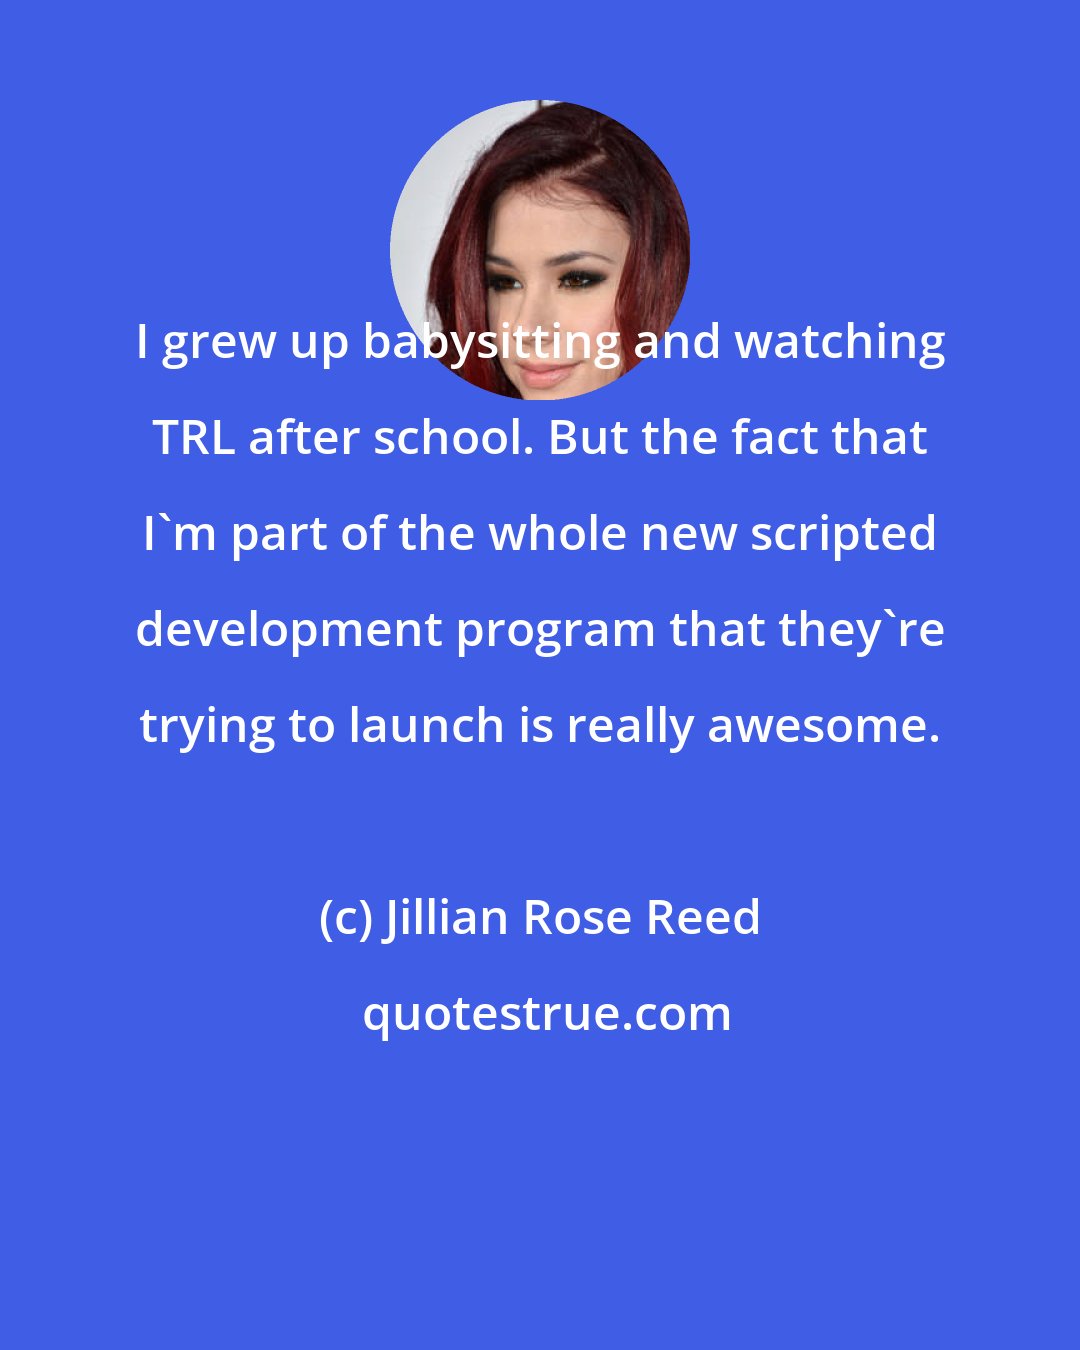 Jillian Rose Reed: I grew up babysitting and watching TRL after school. But the fact that I'm part of the whole new scripted development program that they're trying to launch is really awesome.